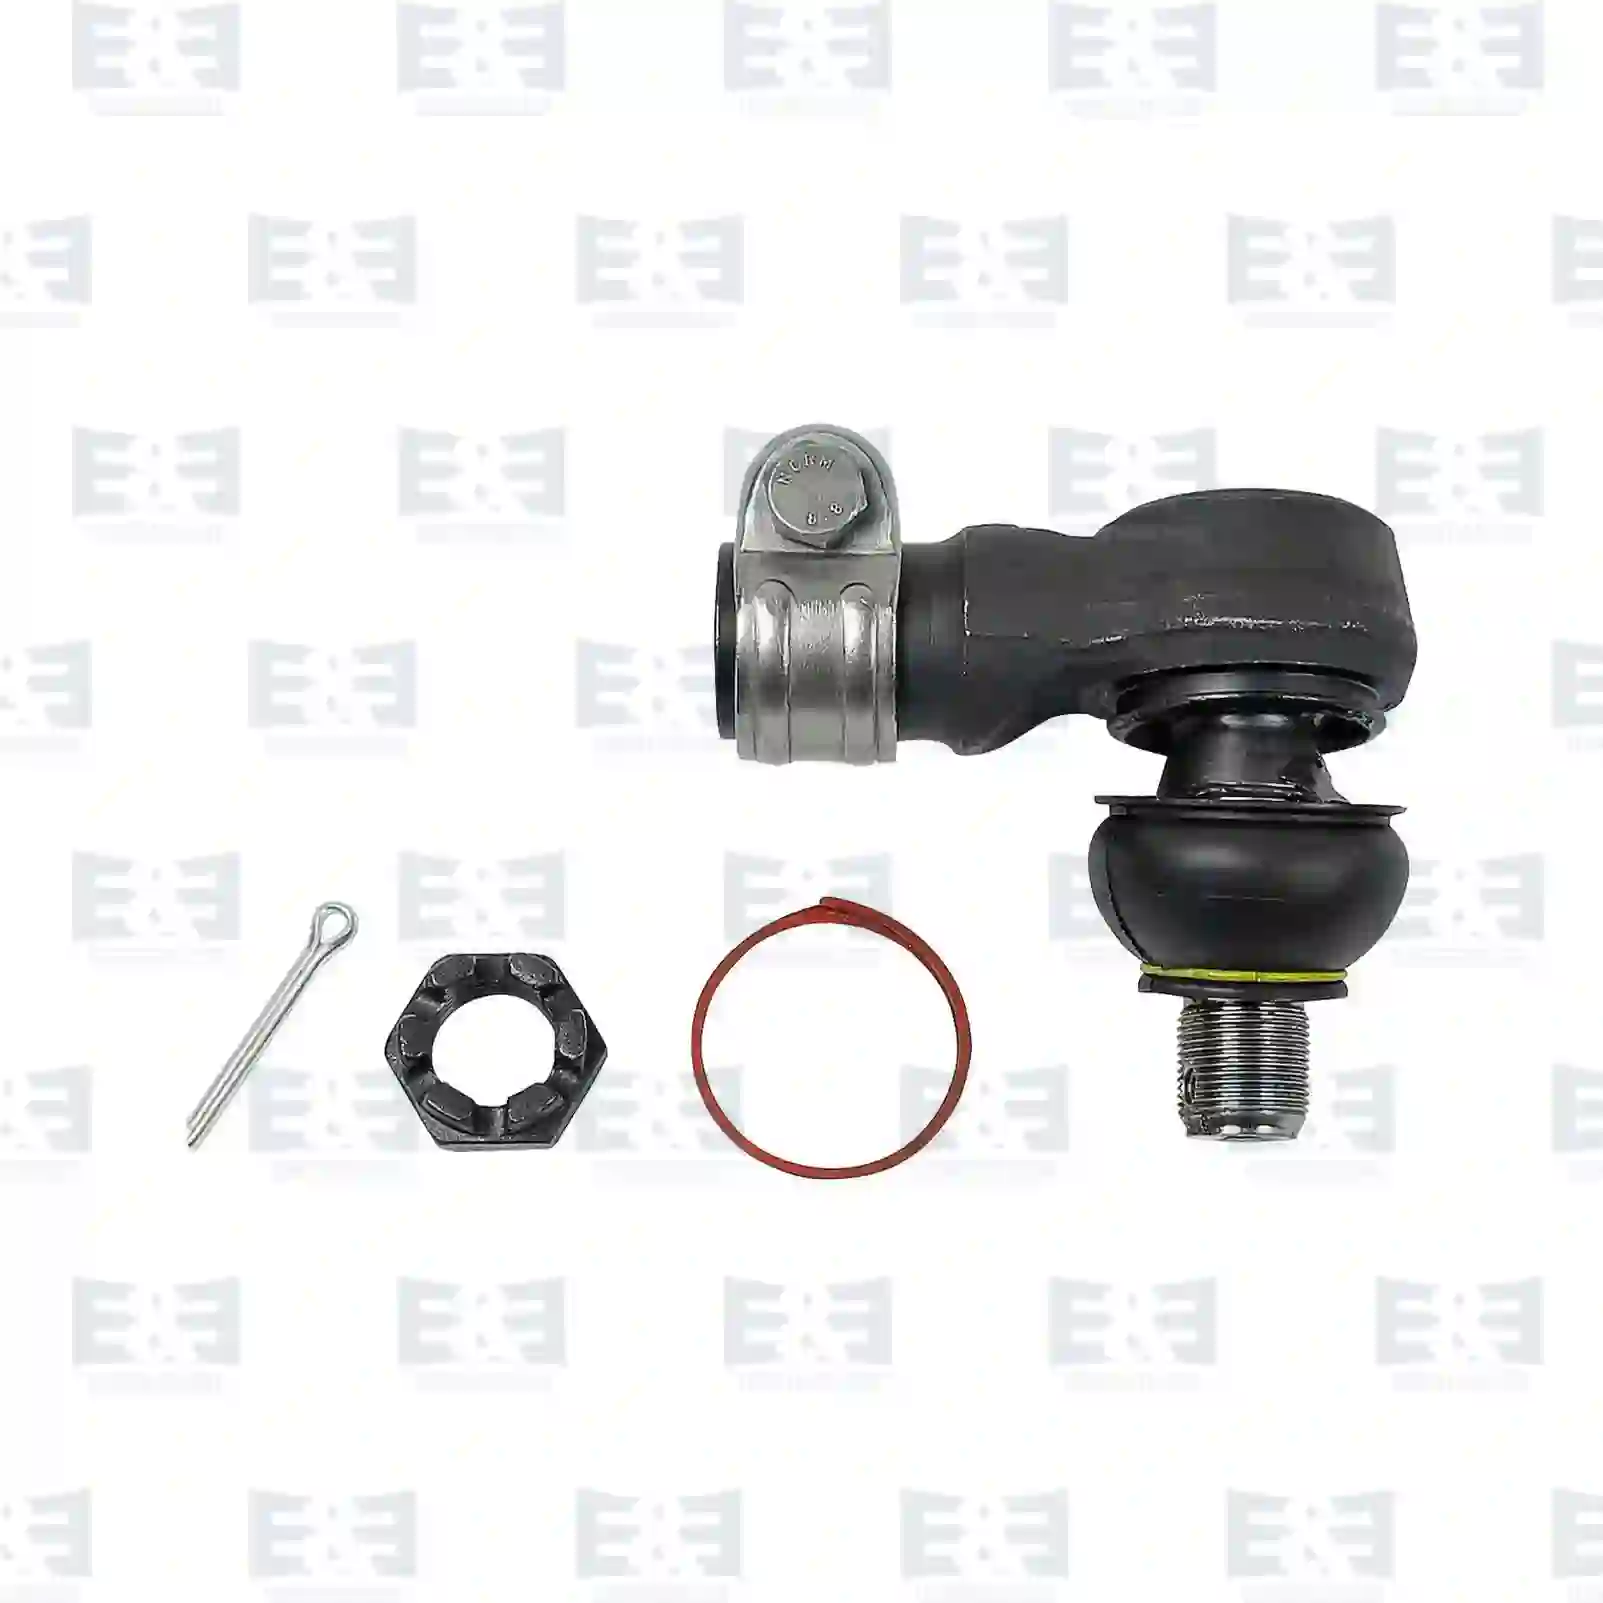 Steering Cylinder Ball joint, right hand thread, EE No 2E2205559 ,  oem no:00157020, 0817824, 1622238, 287351, 817824, 09281792, 1124019, 1124113, 8408188, 8475969, 99707030430, 09281792, 00553498, 0553498, 2997179M10004600650, 09281792, 9281792, 2320012000, 00553498, 7250510, 725051008, 81953010011, 81953010036, 82953010001, 82953010011, 120164610, 82953010001, 1622238, 5000792132, 5810116916, 7485114029, 1605300062, 24475440, 01012110003, 10911103, 4780572, 6631830, ZG40404-0008 E&E Truck Spare Parts | Truck Spare Parts, Auotomotive Spare Parts